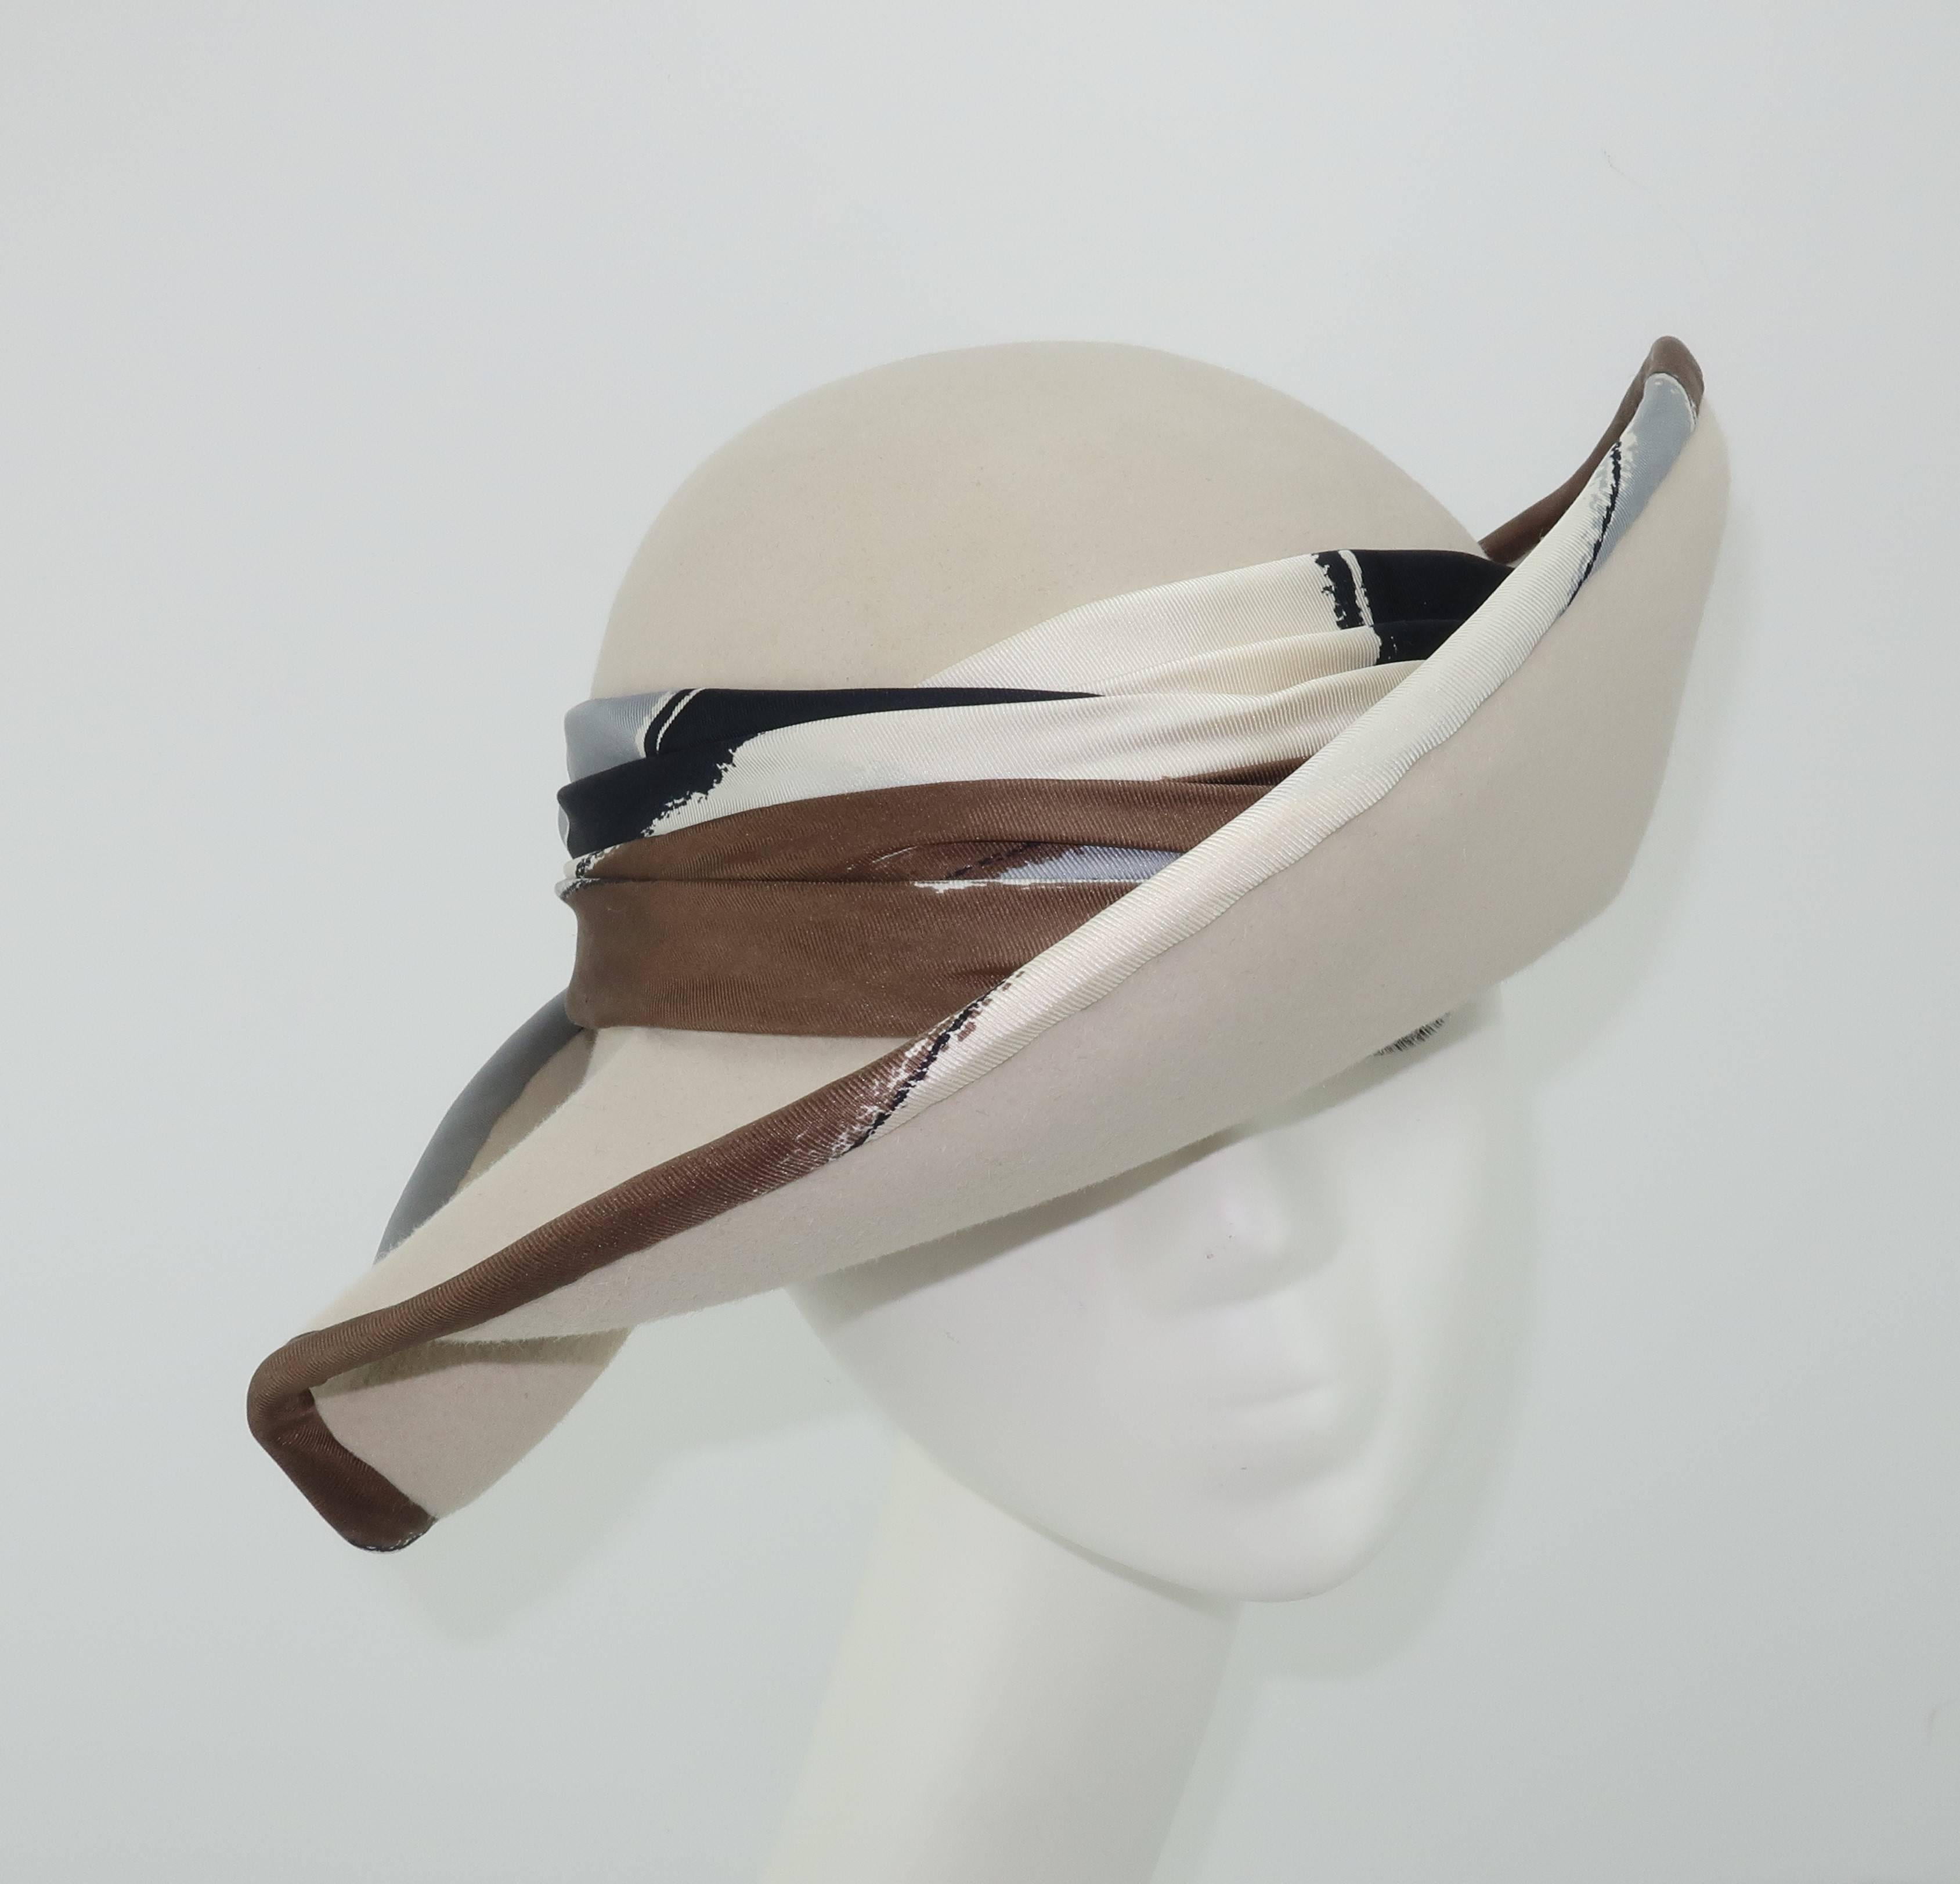 This C.1970 Bonta Creatrice wool felt hat stylishly performs the double duty of providing an incognito brim for hiding and yet a beautiful frame for the face.  The bone colored Italian wool felt body is expertly shaped with asymmetrical folds